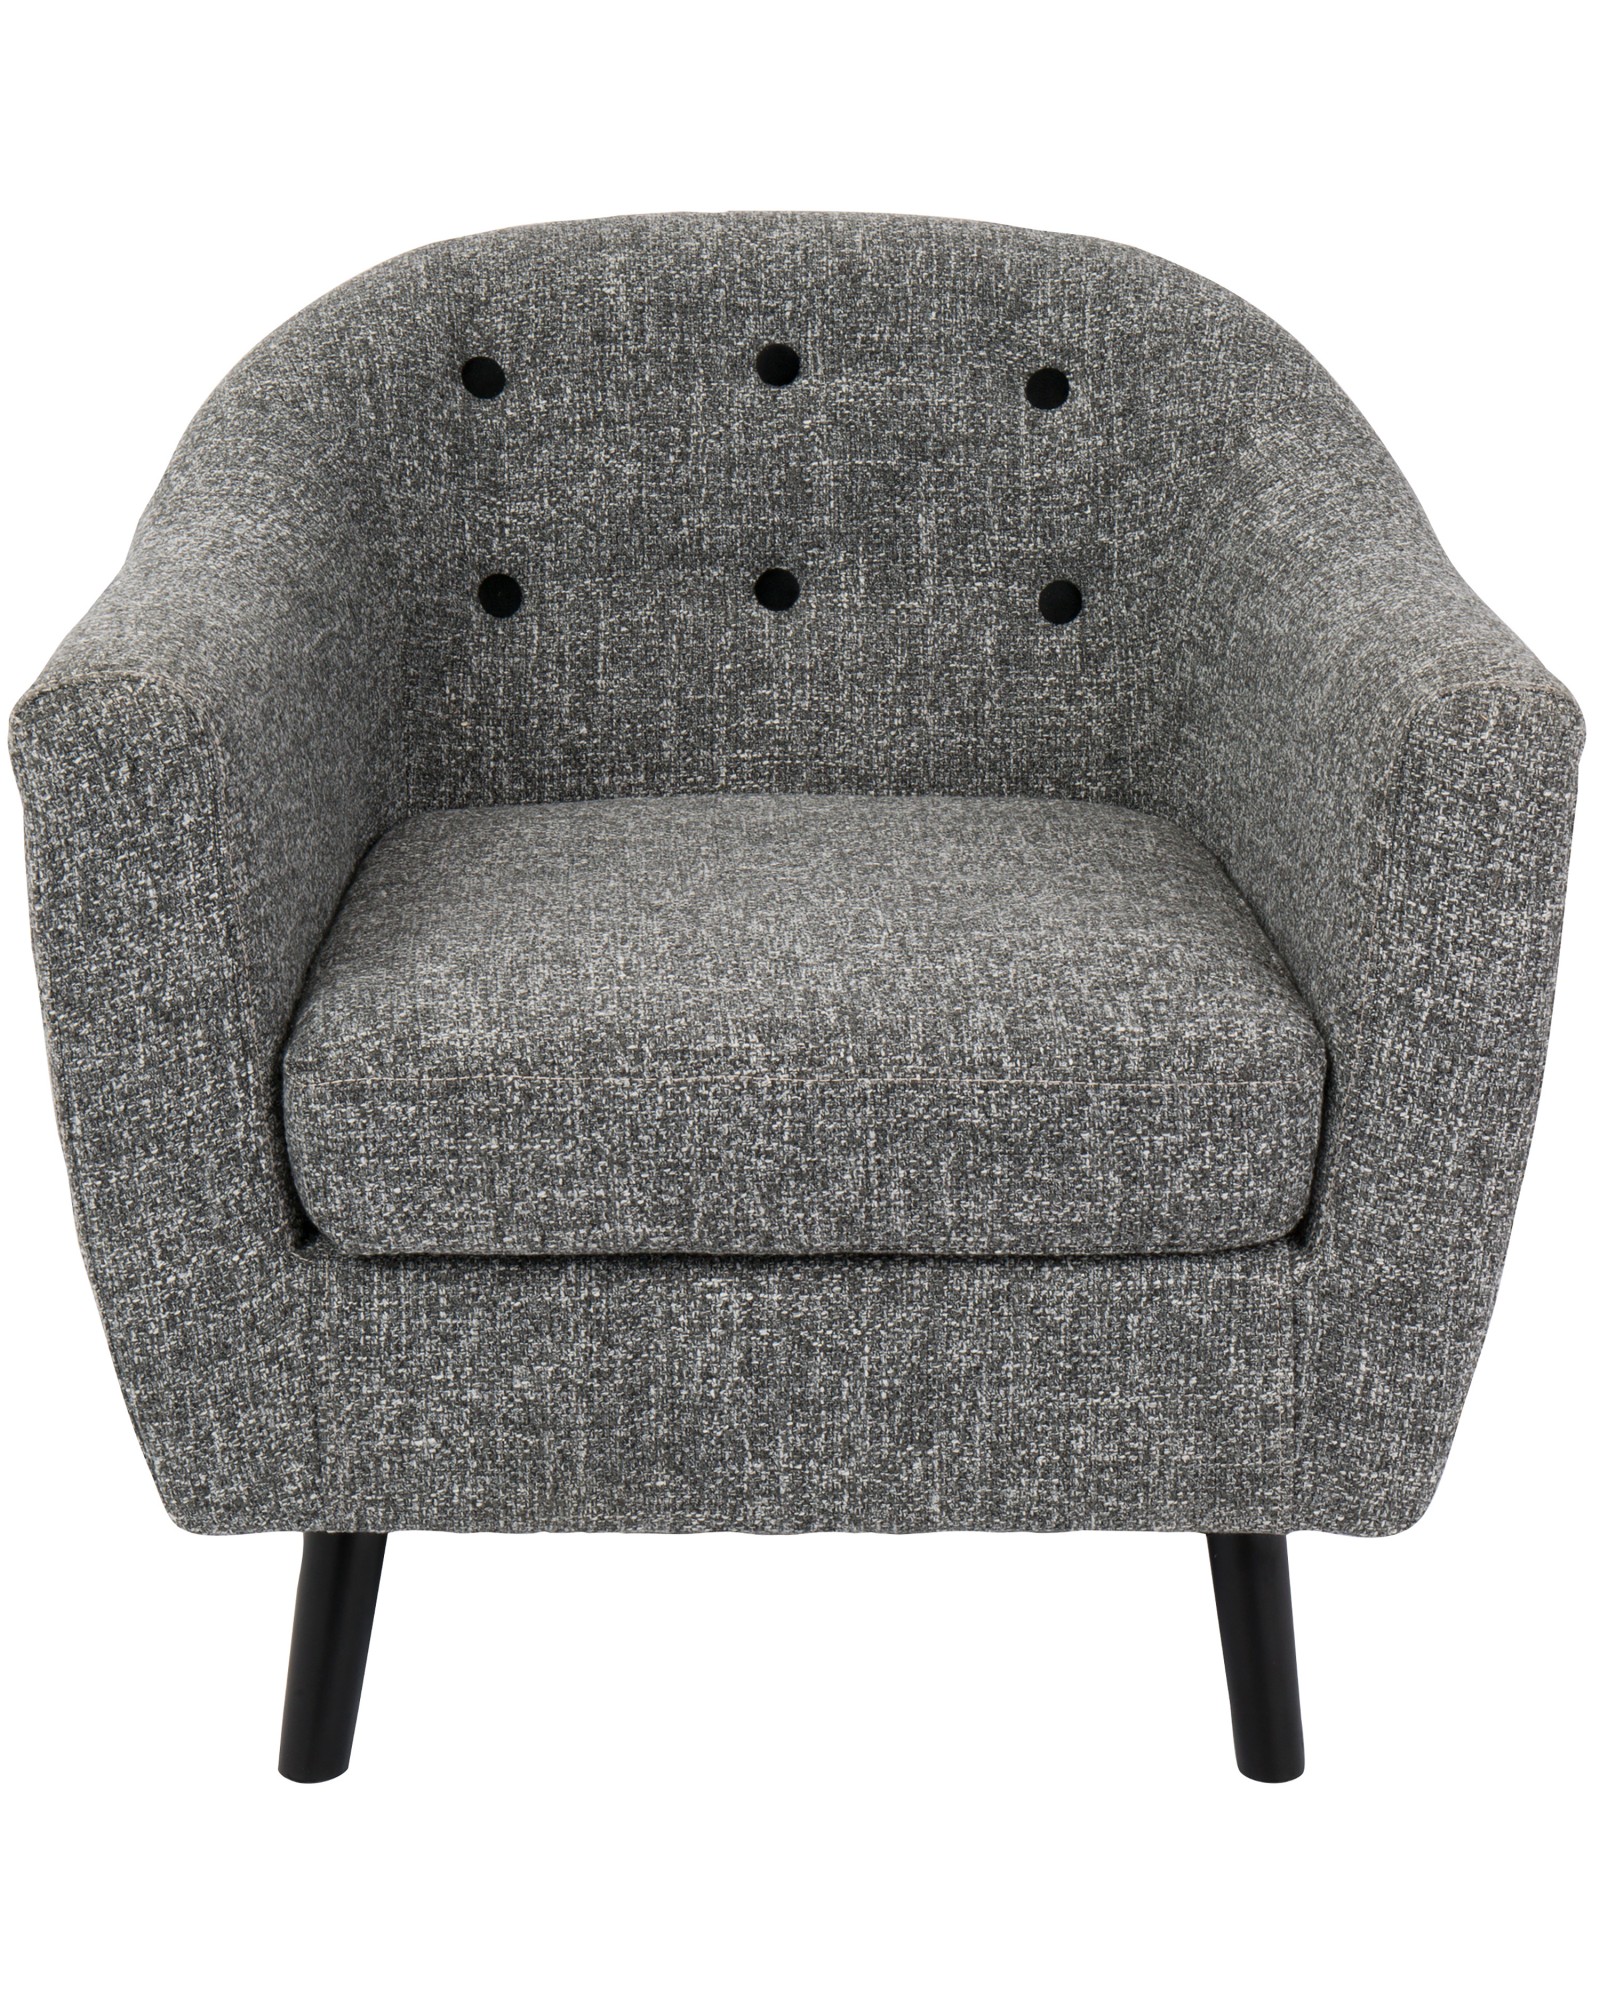 Rockwell Mid-Century Modern Accent Chair with Noise Fabric in Dark Grey